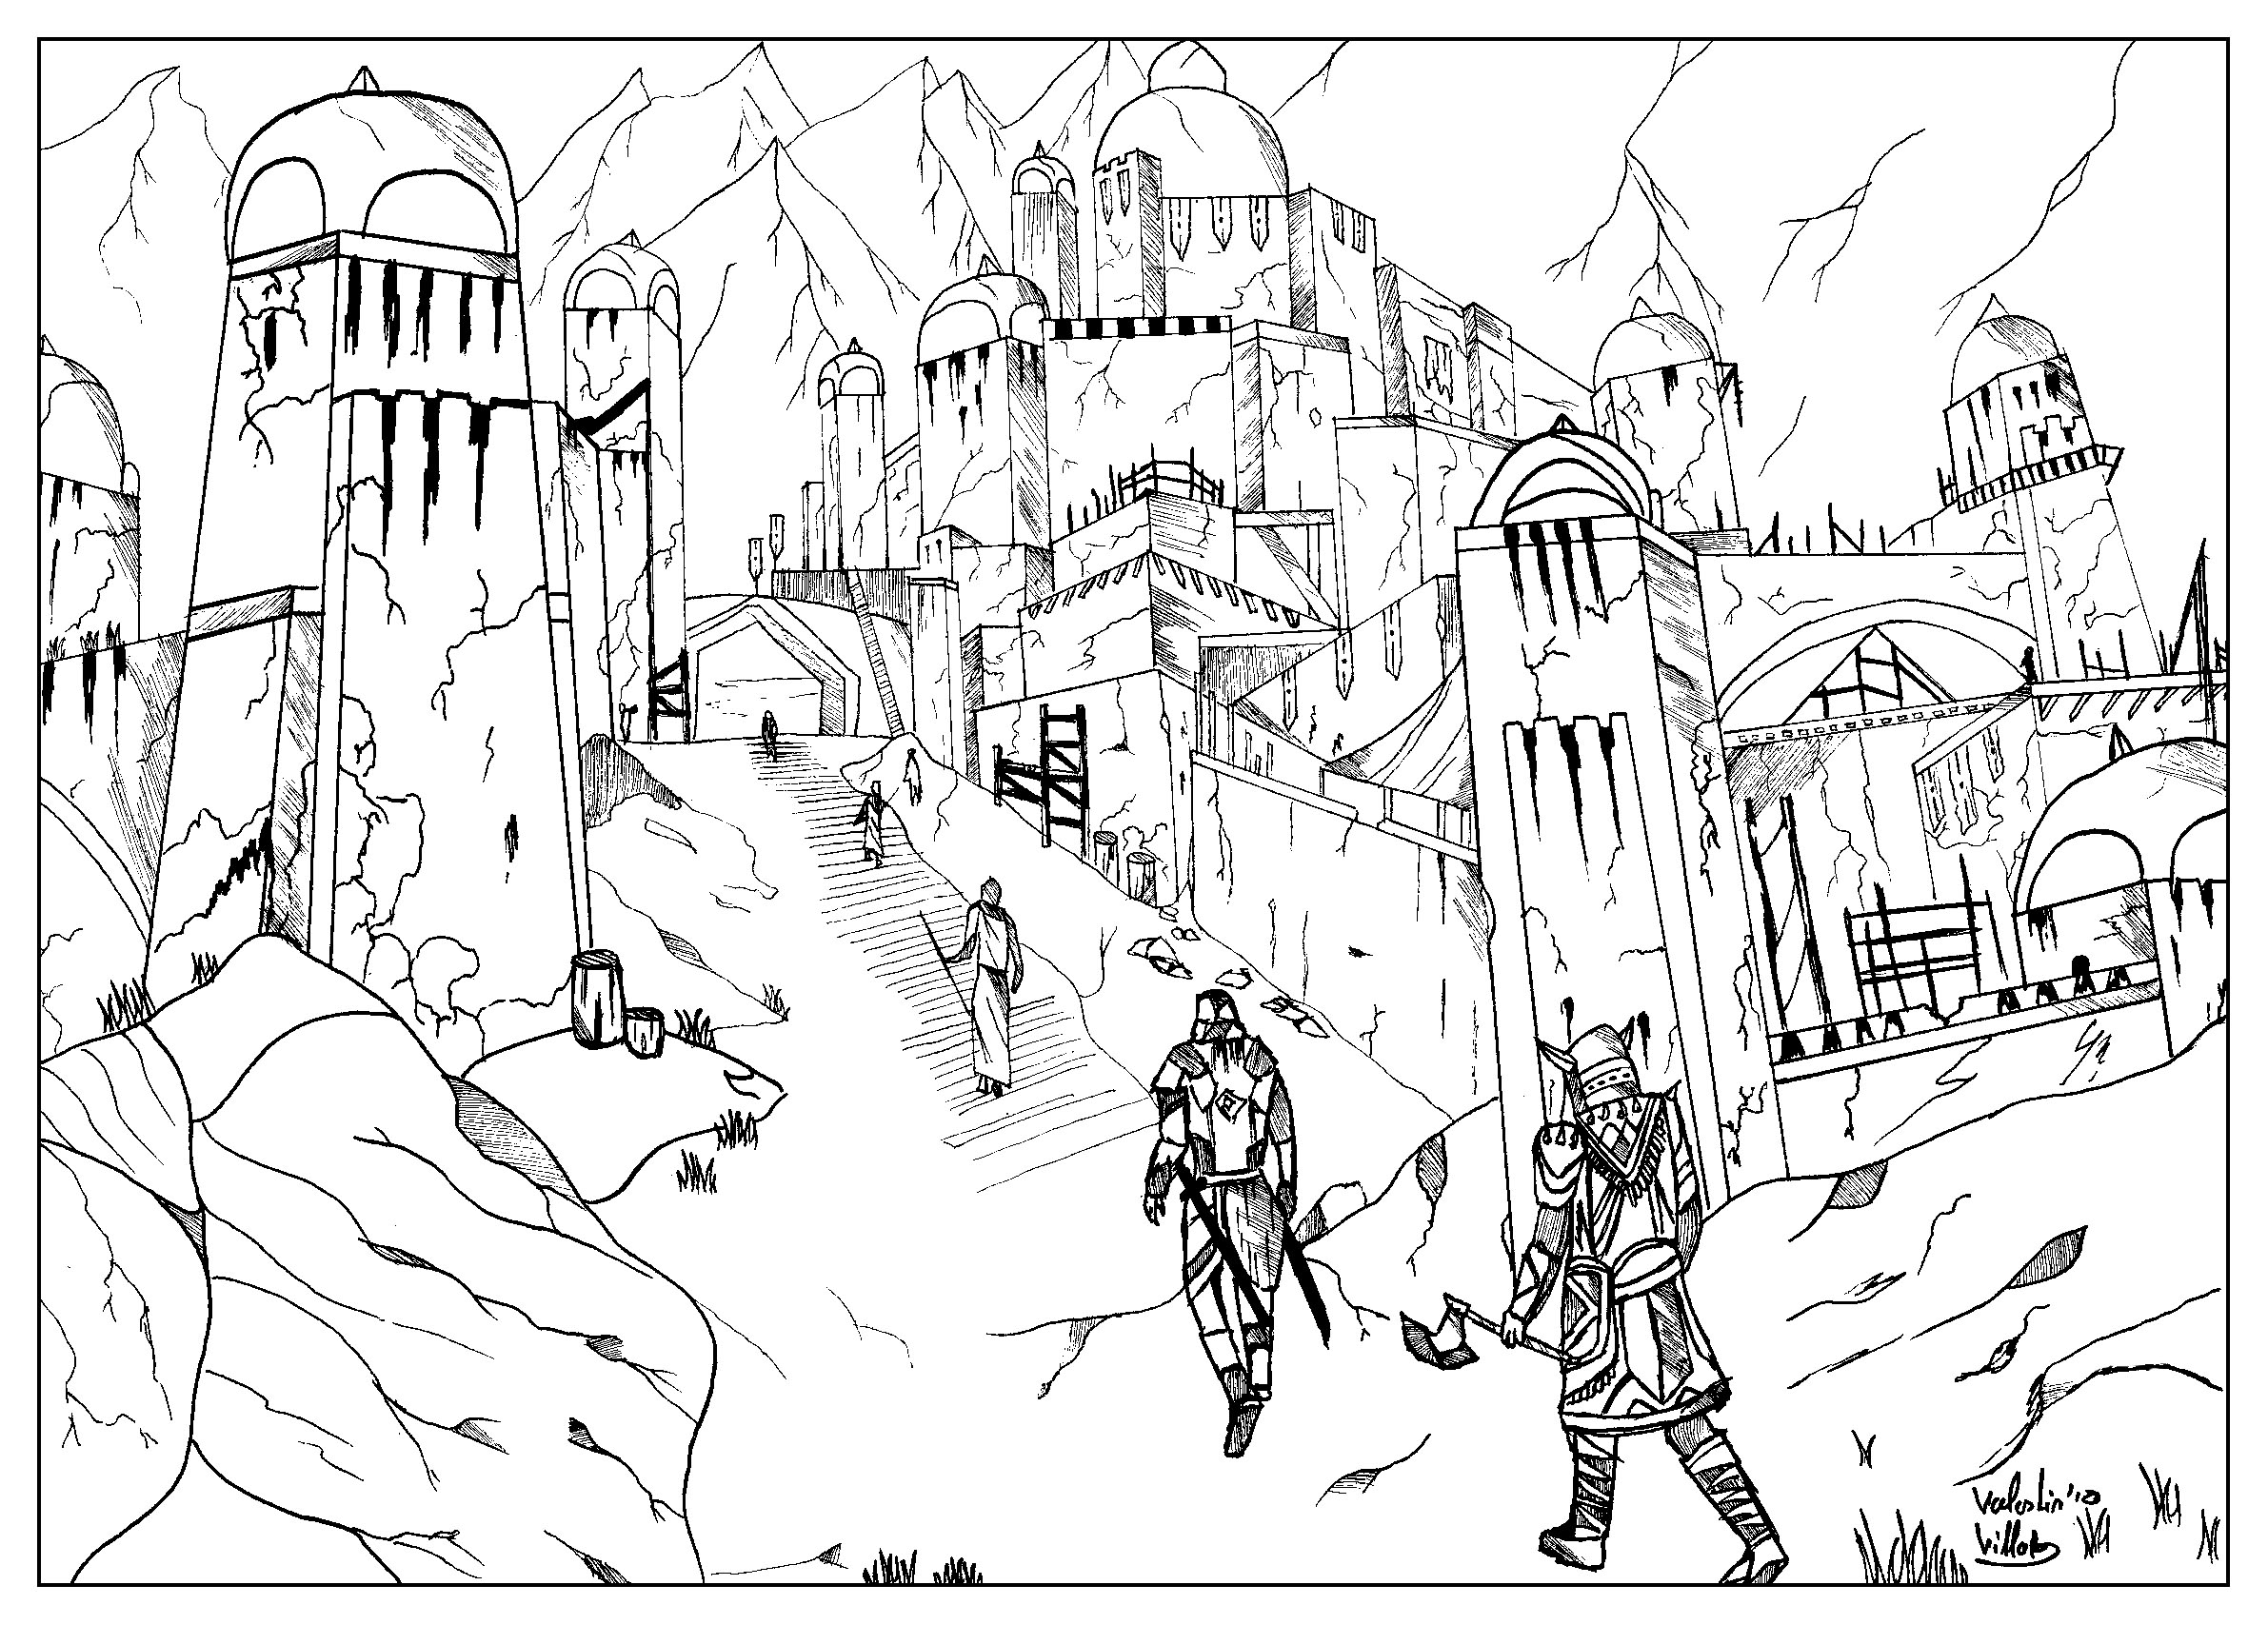 Coloring page inspired by the video games The Elder-scroll Online, Artist : Valentin